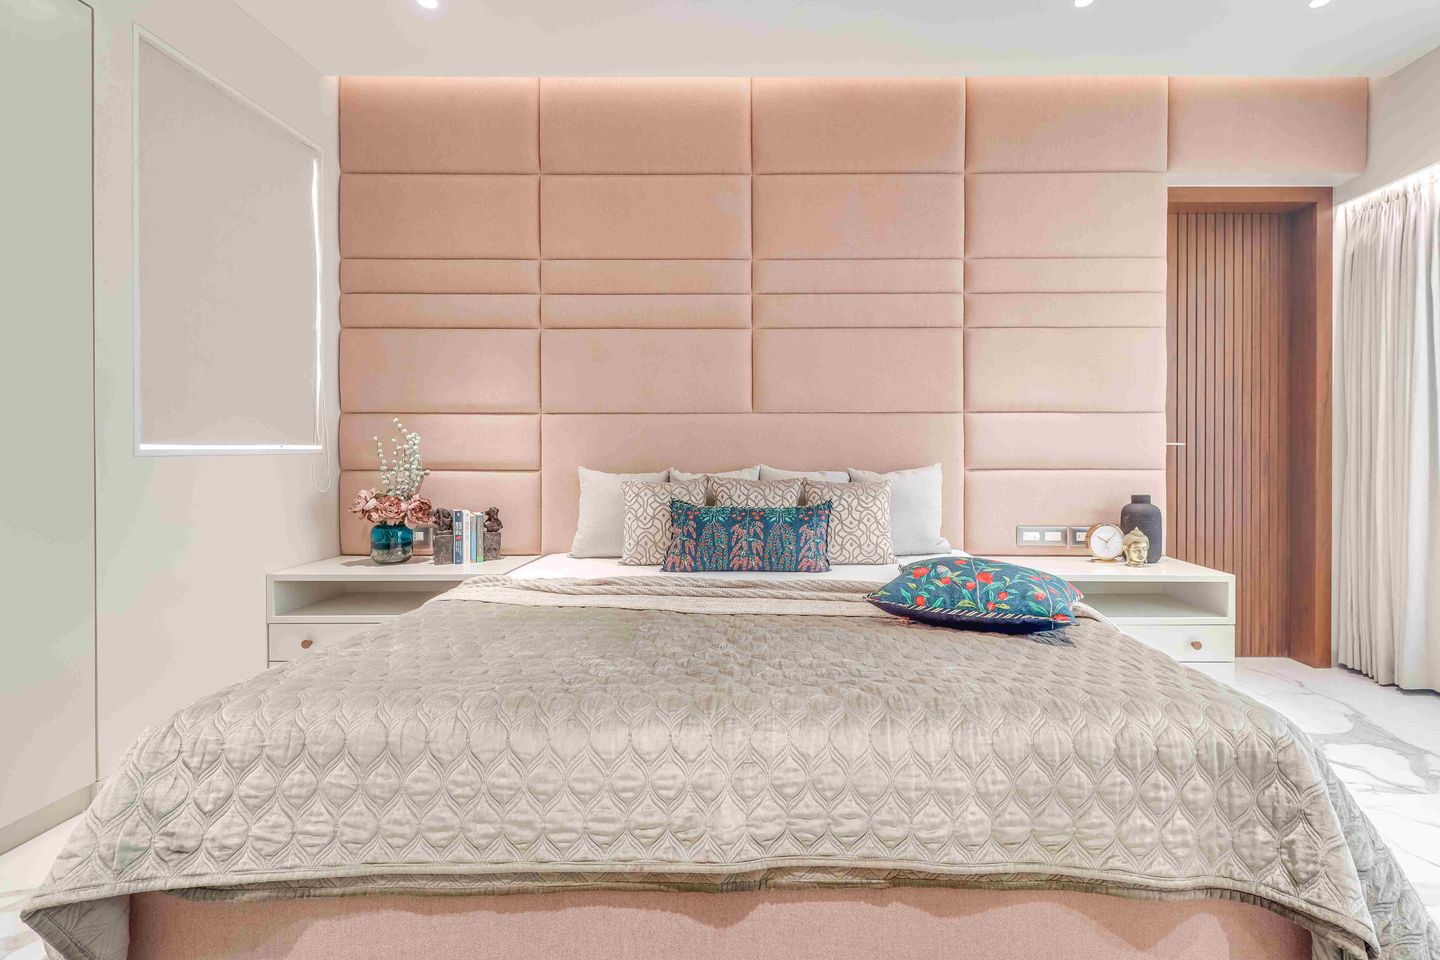 Wall Design With Light Peach Panelling - Livspace